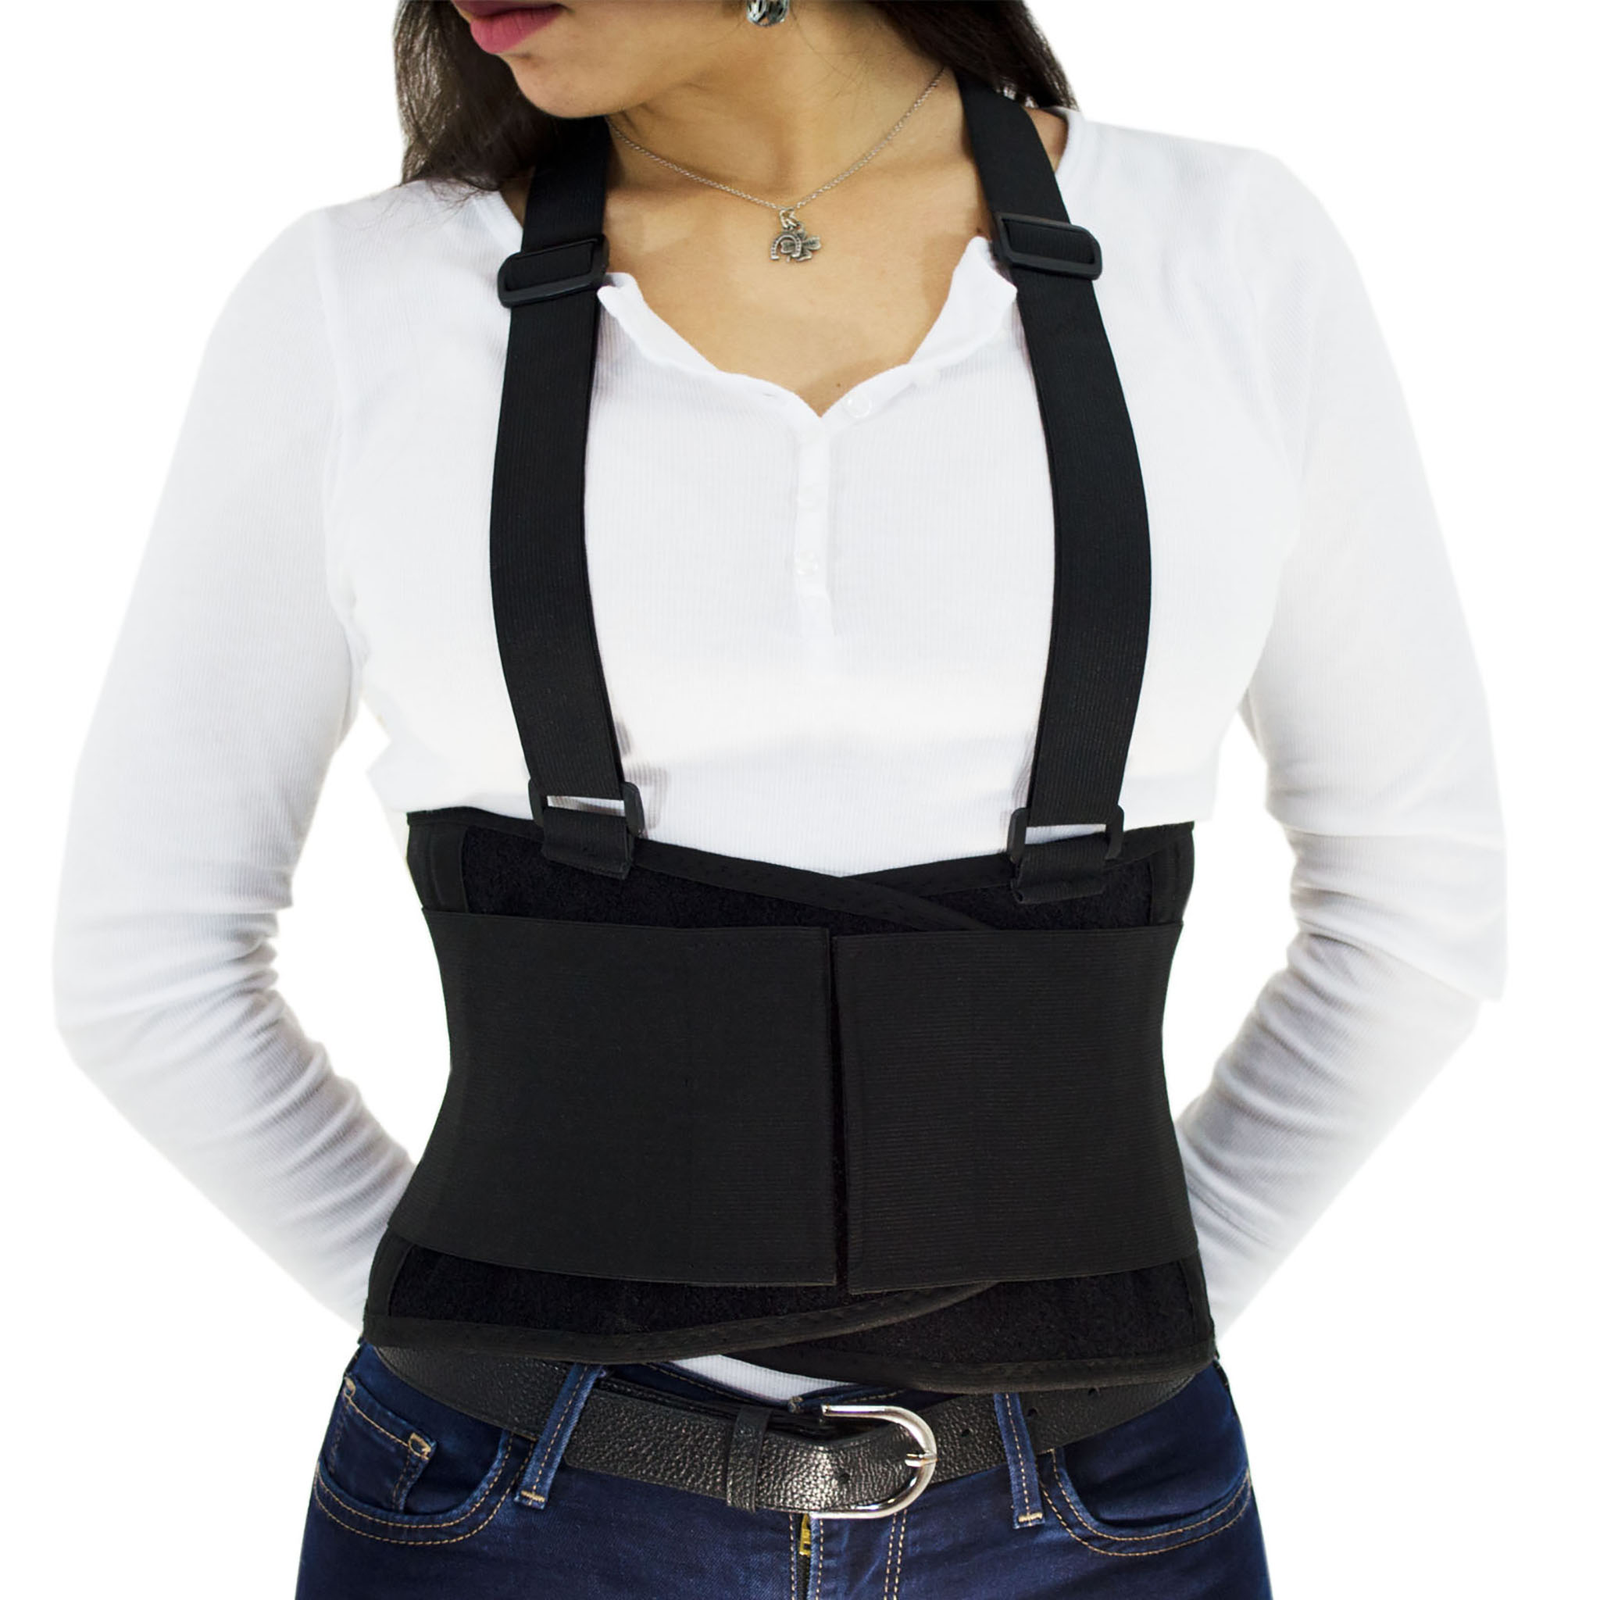 Front a lady wearing the back JORESTECH back support belt with adjustable suspenders 